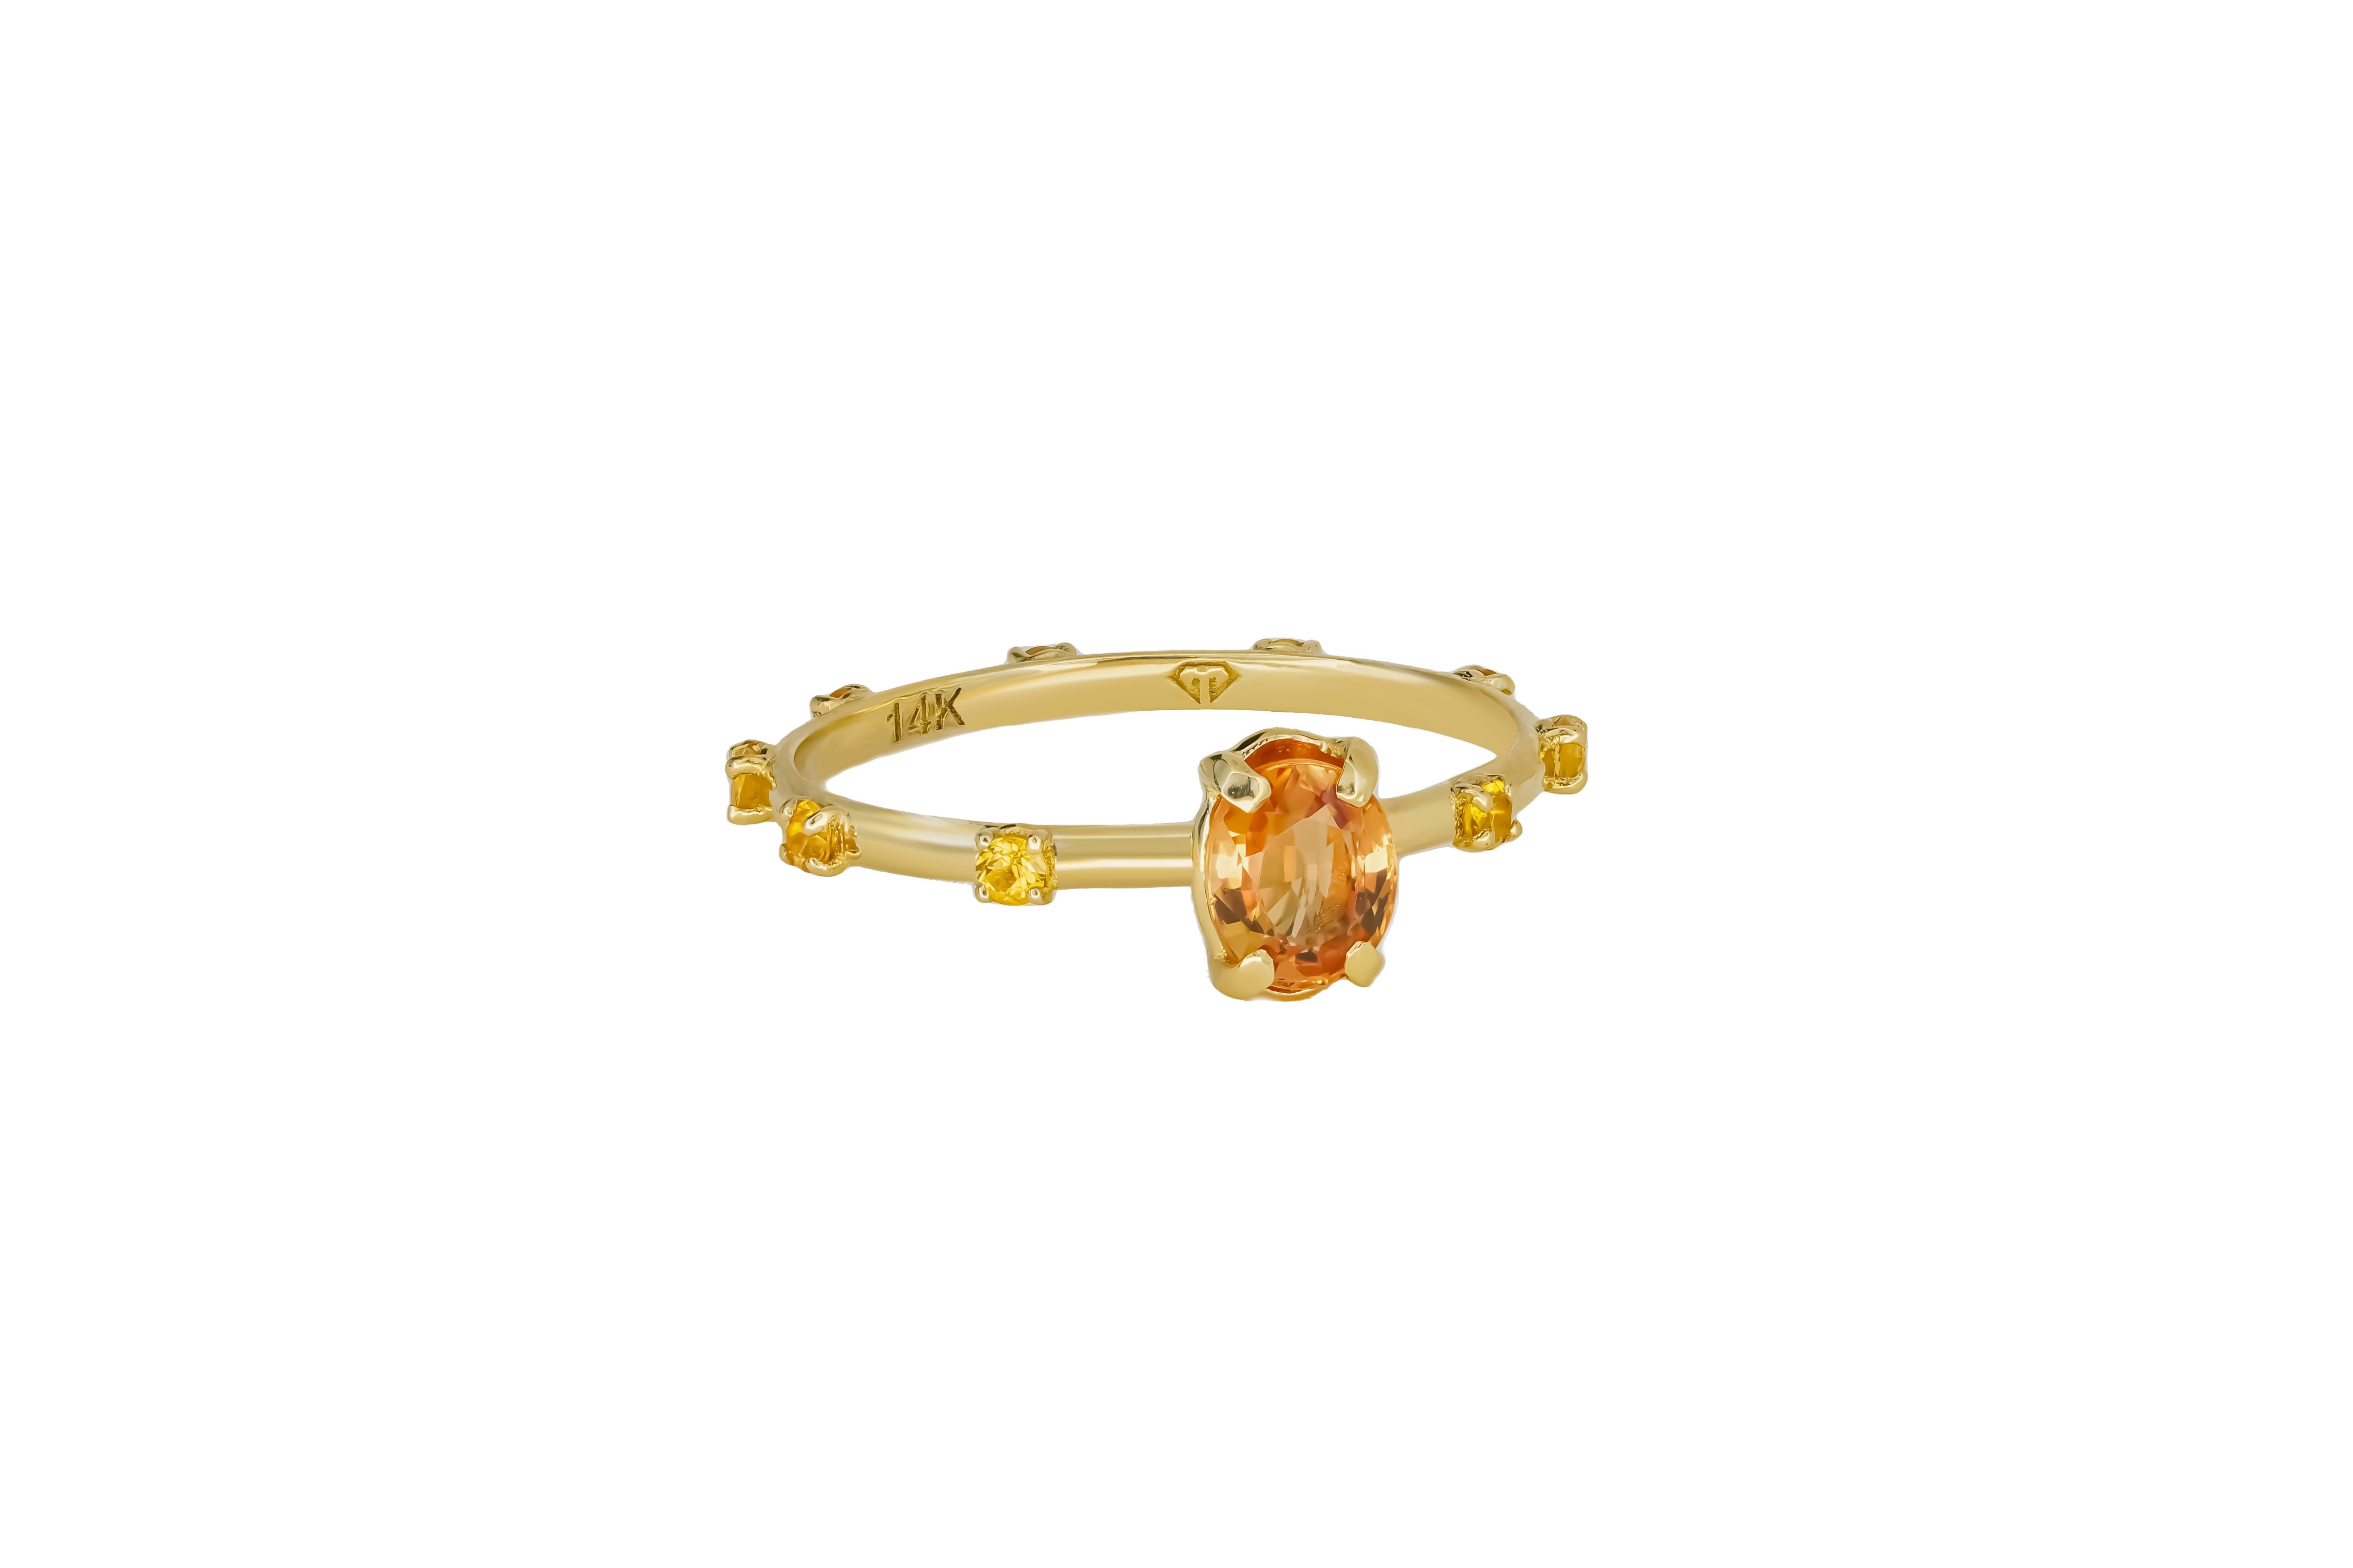 Lab Sapphire 14k gold ring. Oval Sapphire ring.  Yellow gem ring. 

Metal: 14k gold ring
Weight: 1.8 gr depends from size

Gemstones:
Lab sapphire, oval cut, 1 ct, yellow - orange color
Small yellow sapphires

In our shop you can find a  selection